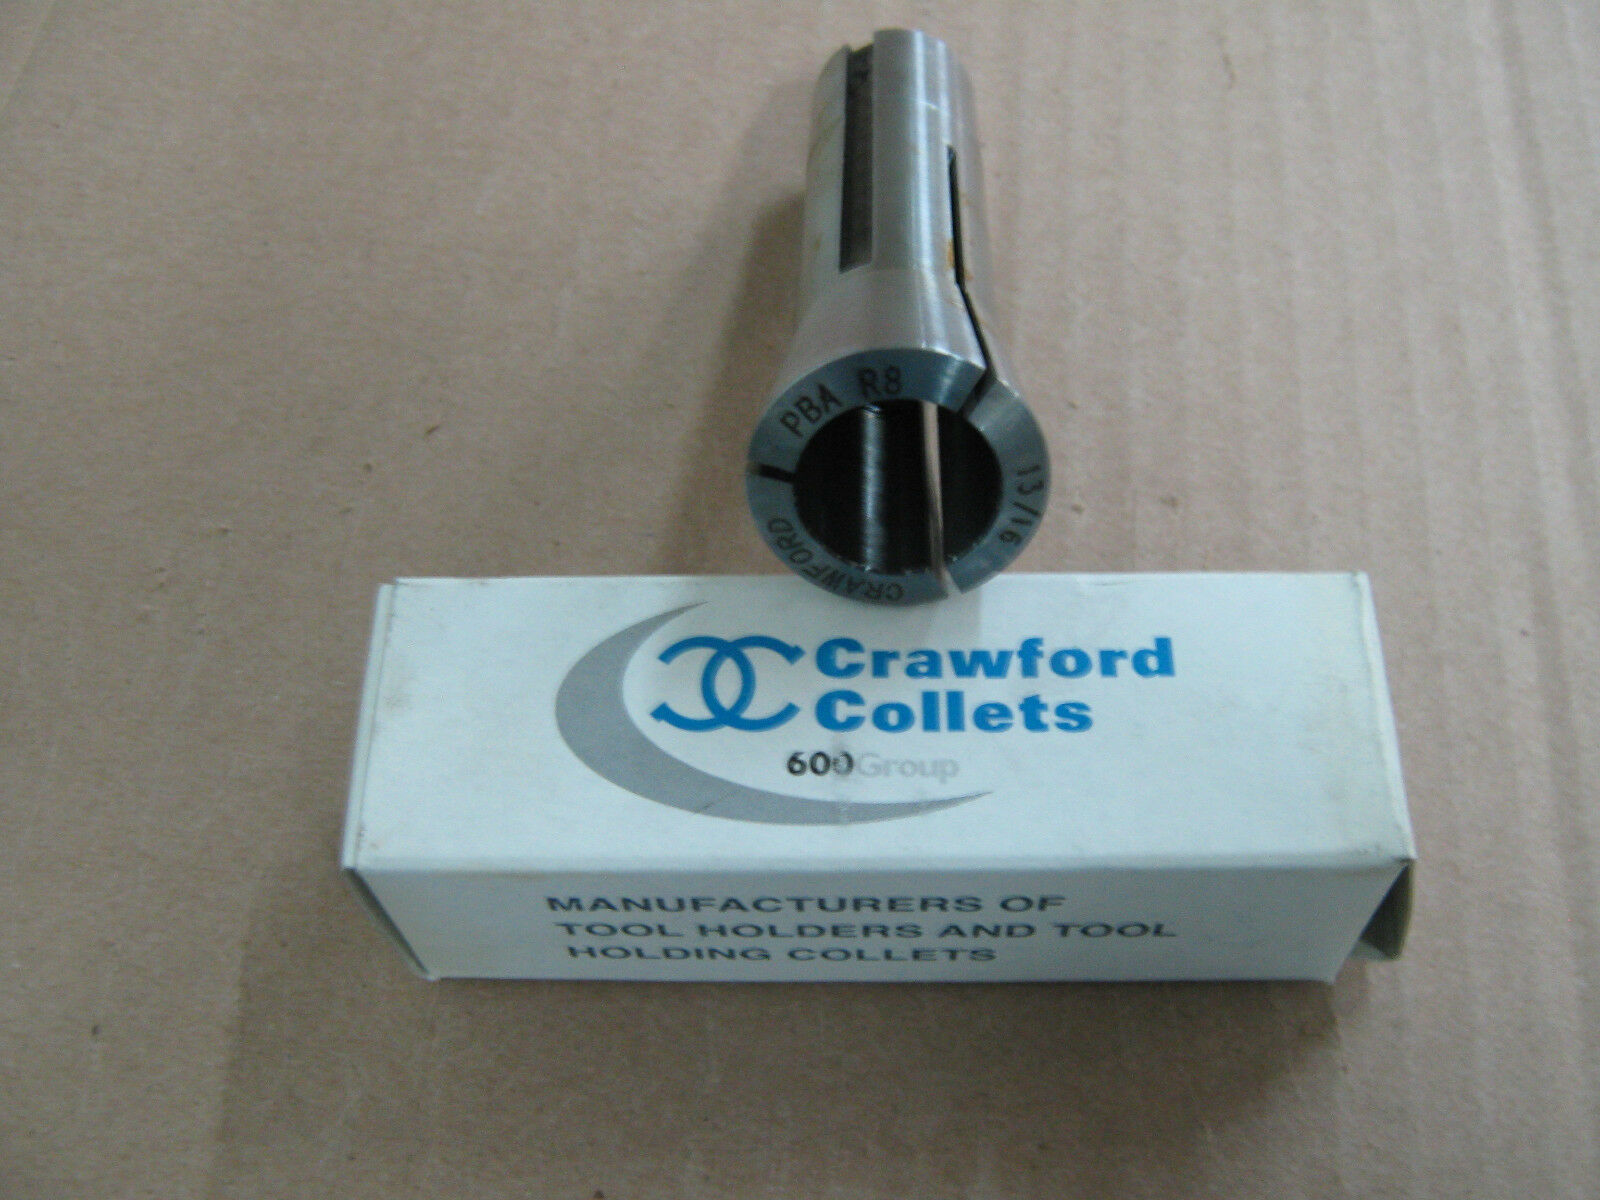 R8 Crawford Pba Collets-600 Group (imperial) Various Sizes "new" Most Available